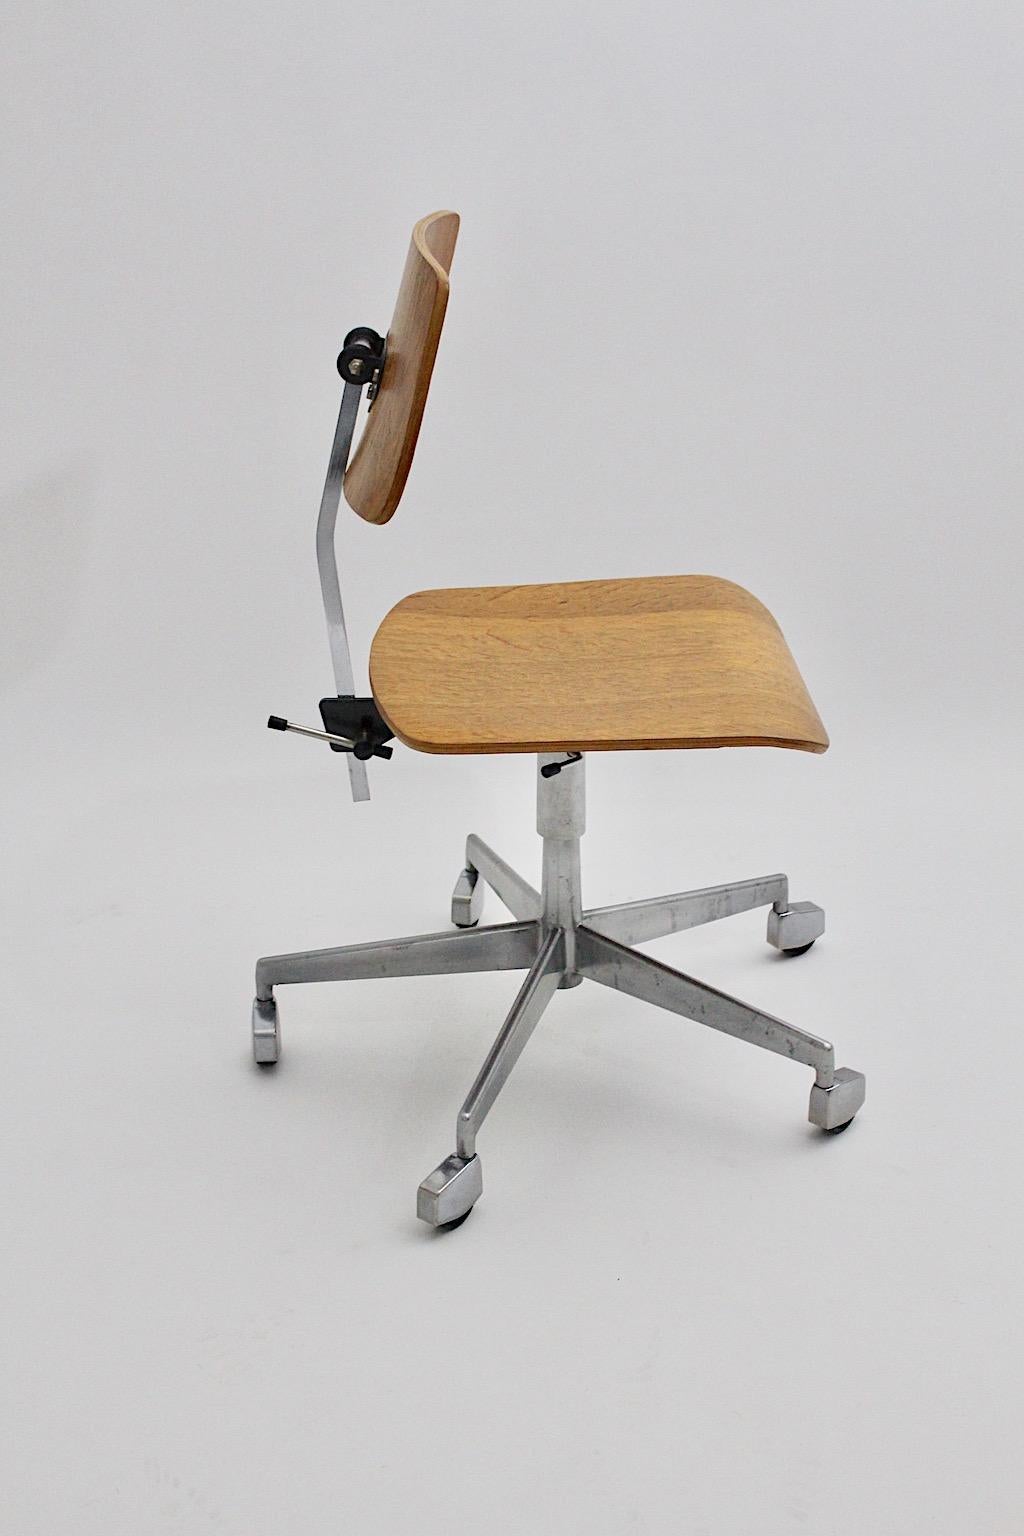 Scandinavian Modern vintage desk chair or office chair with swiveling function by Labofa from chromed metal and oak laminated plywood
1950s Denmark.
A wonderful swiveling desk chair from oak laminated plywood on the seat and back, while the back is